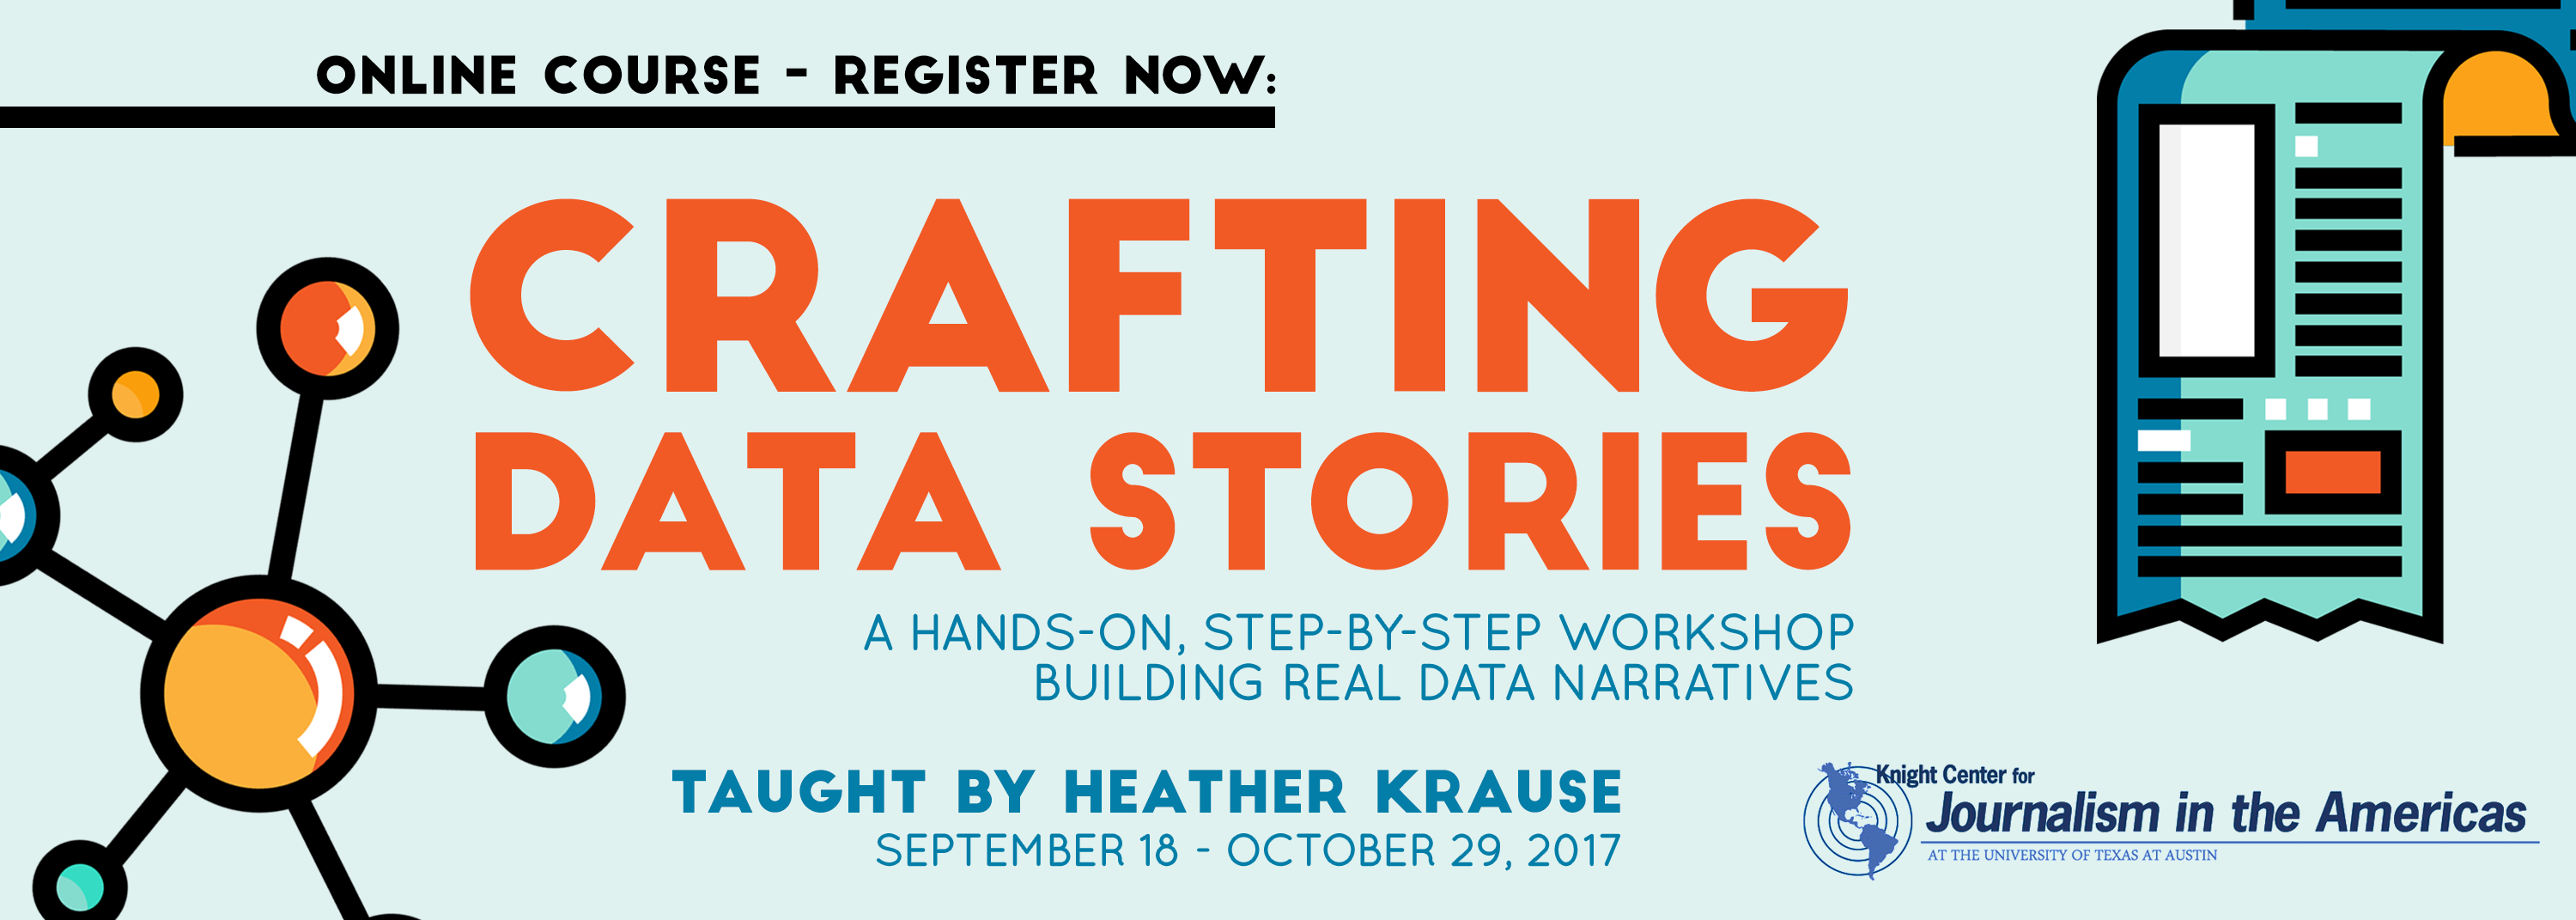 Crafting Data Stories